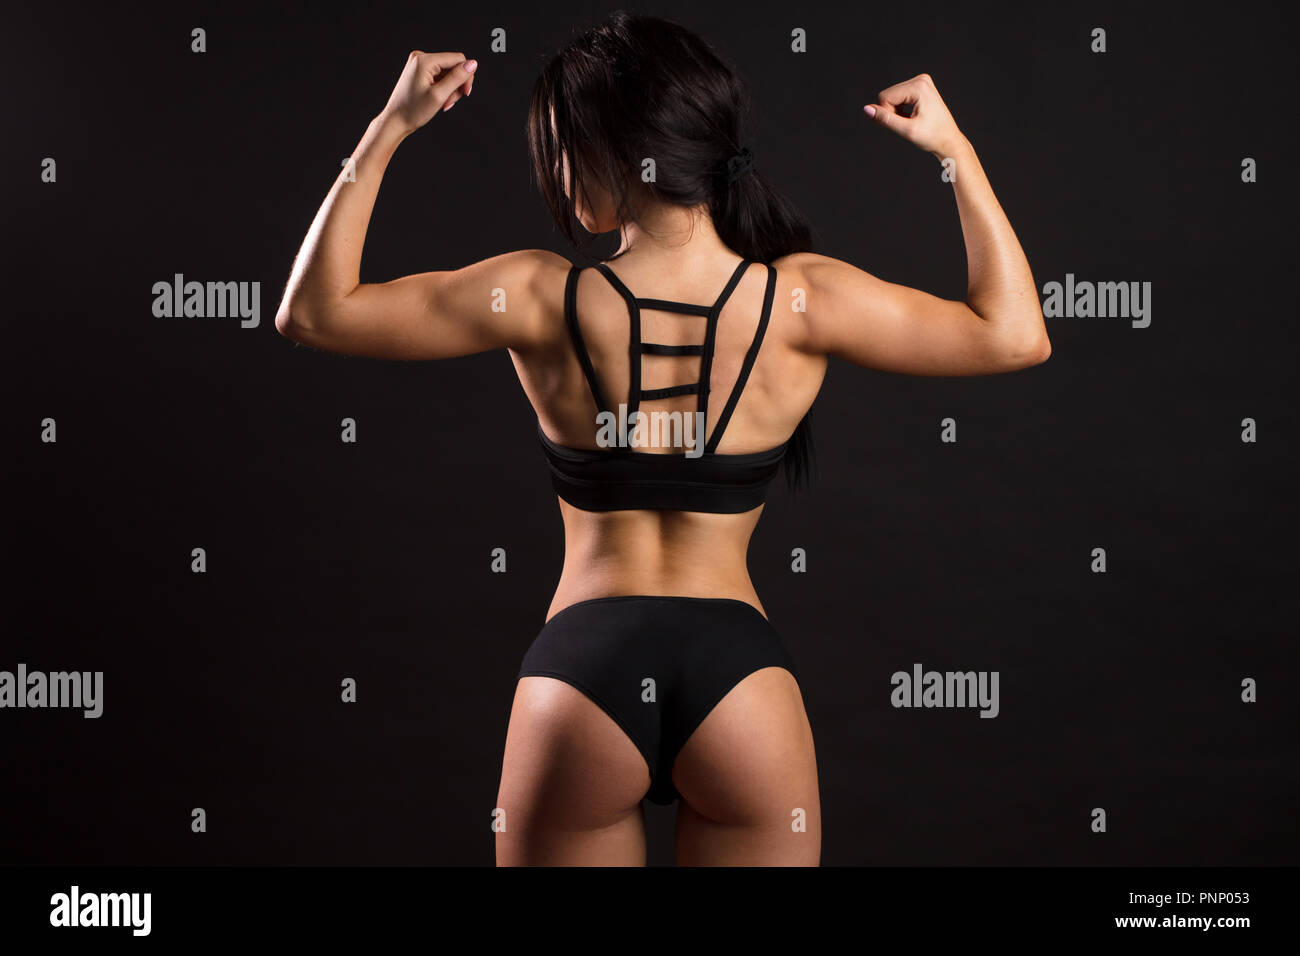 https://c8.alamy.com/comp/PNP053/rear-view-of-woman-with-muscular-body-fitness-female-showing-muscular-back-PNP053.jpg